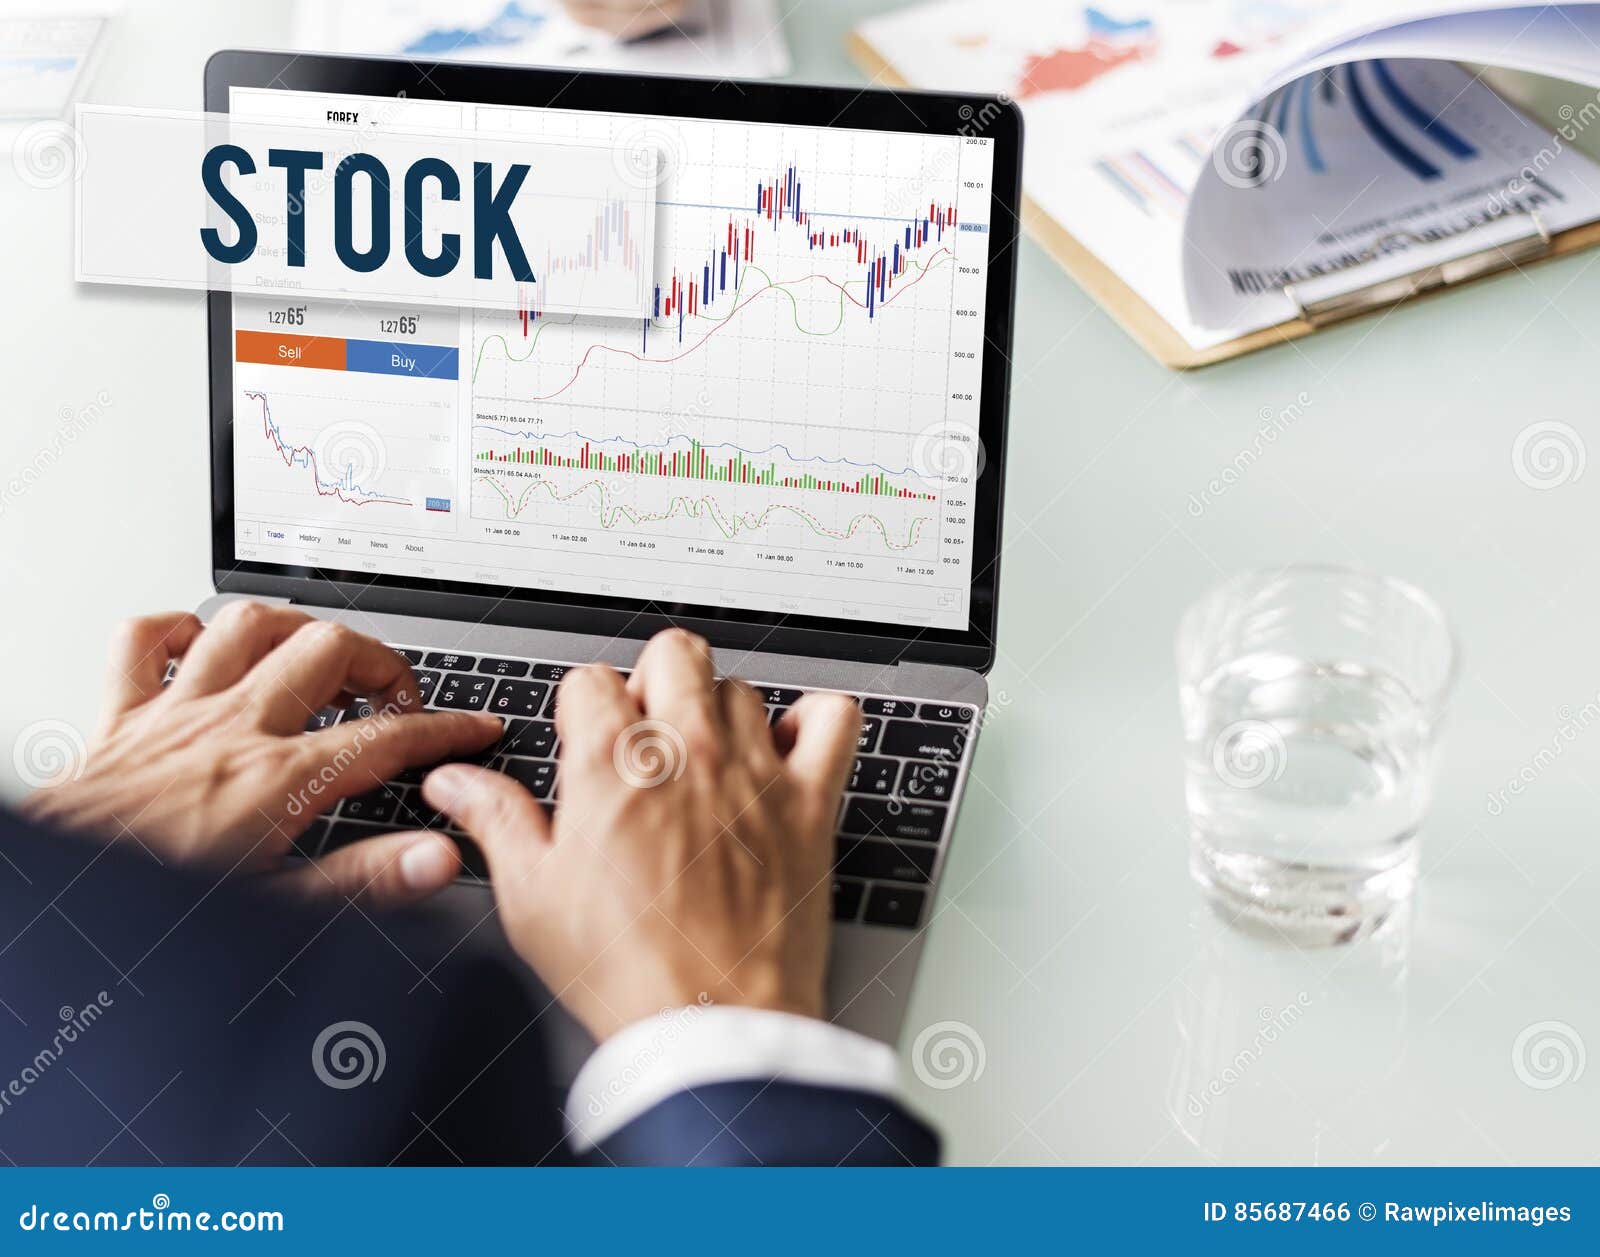 stock market results stock trade forex shares concept